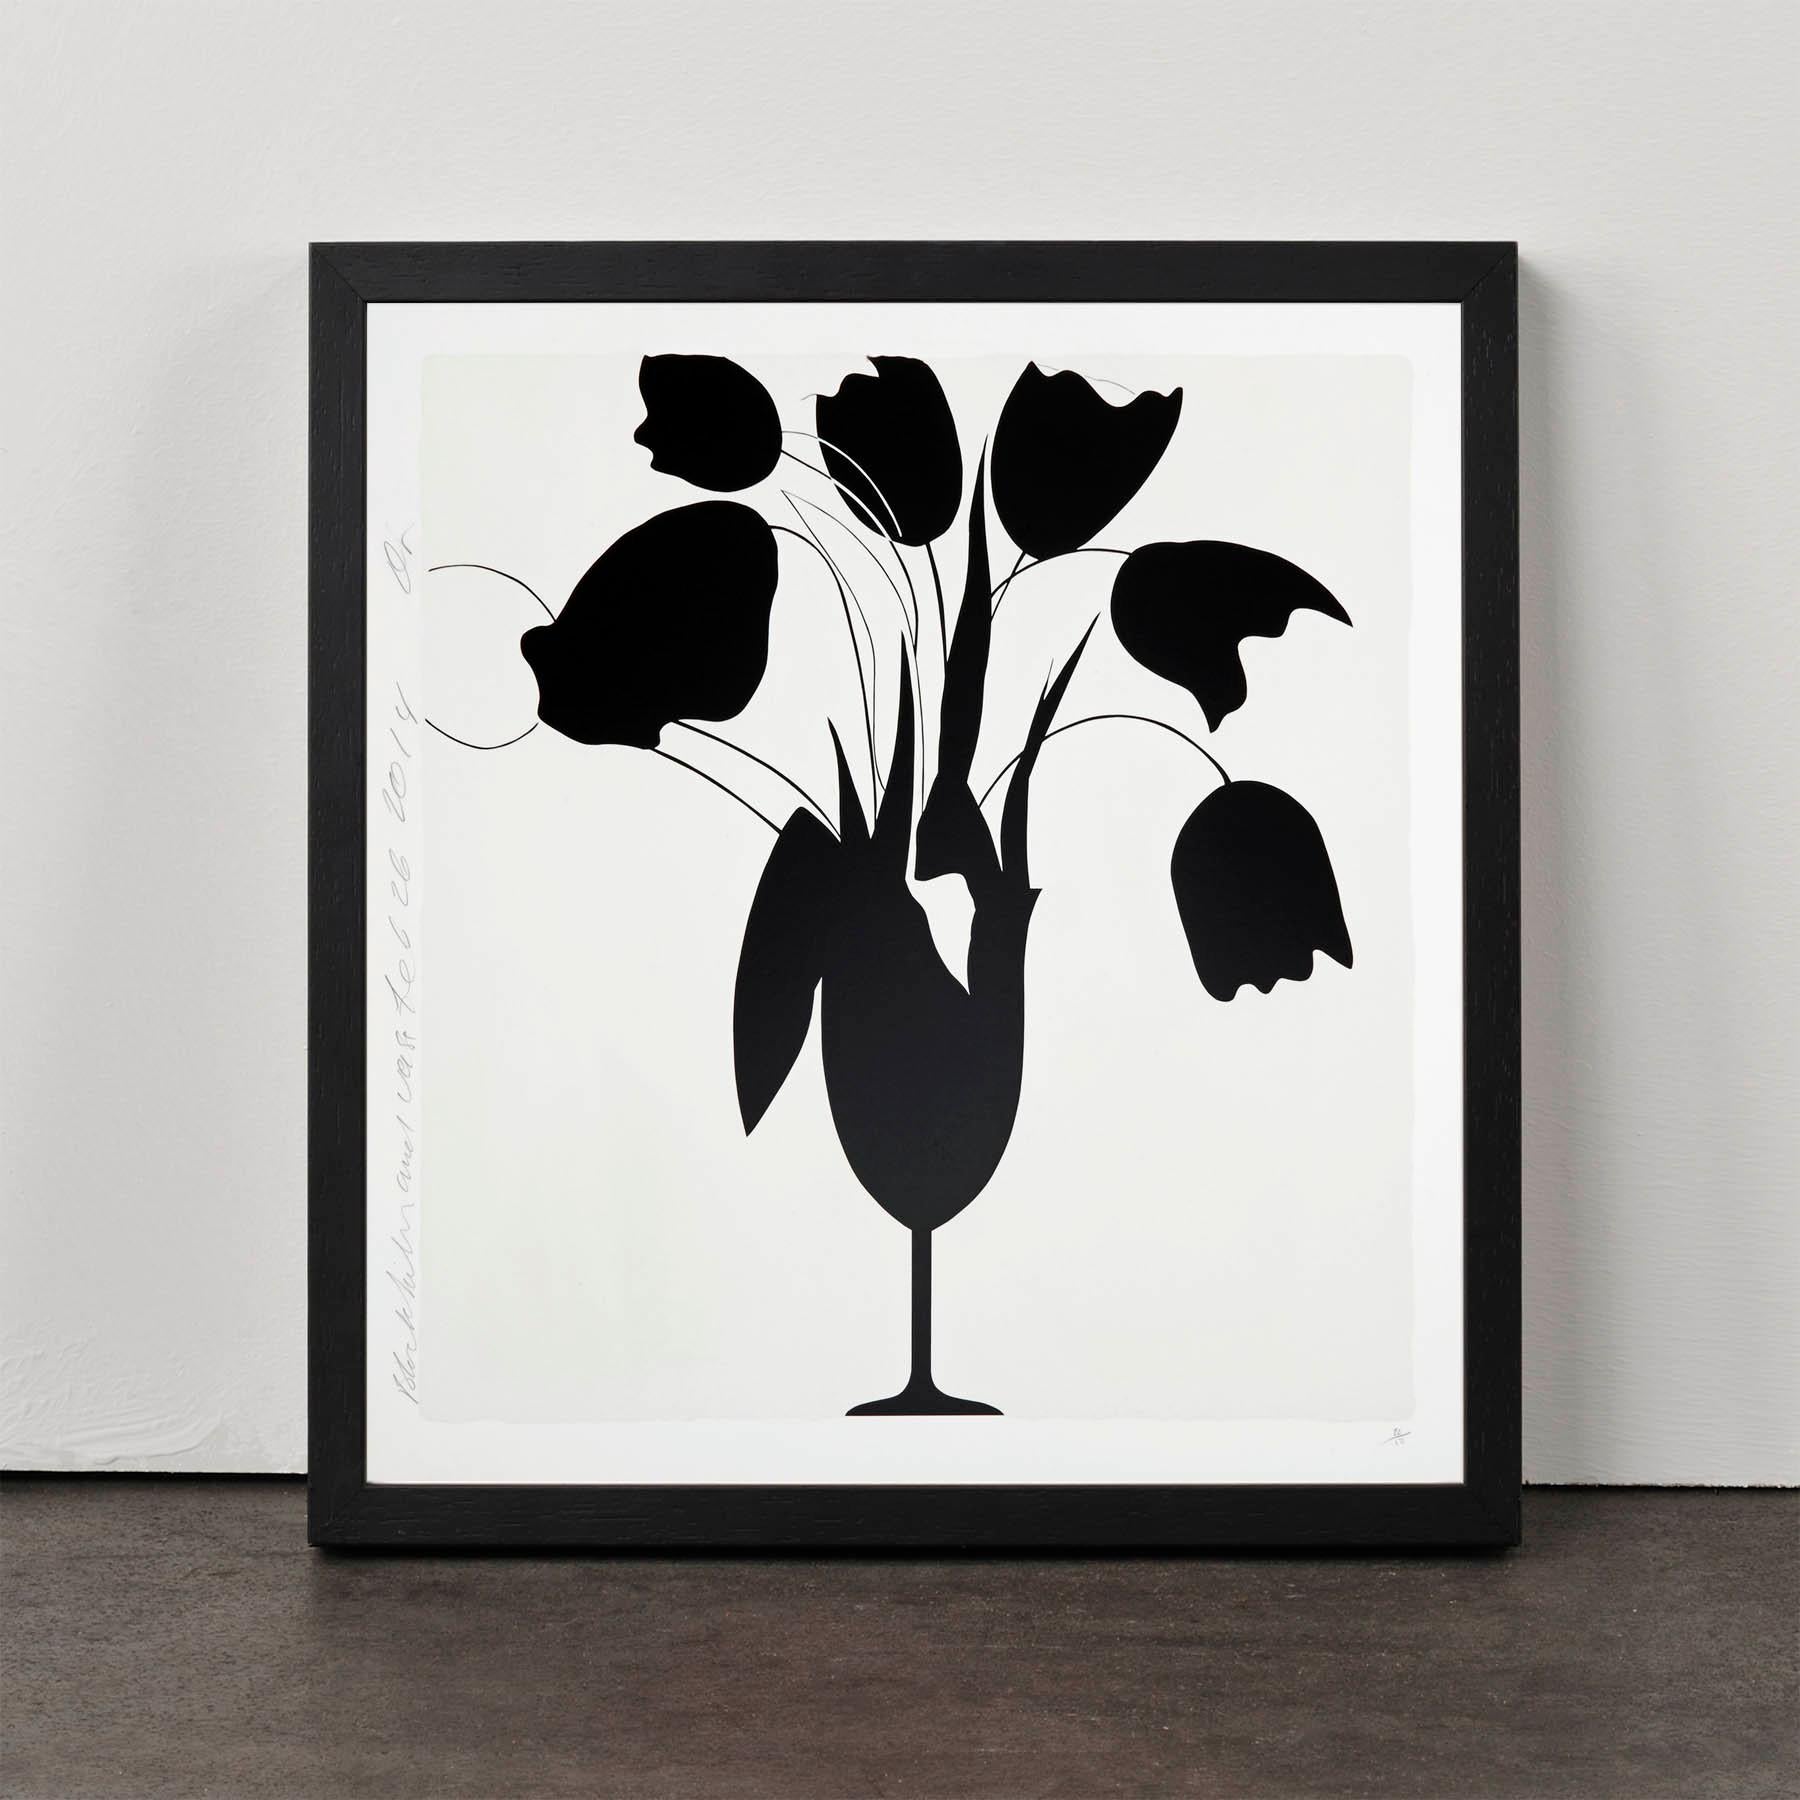 Black Tulips and Vase - Contemporary, 21st Century, Silkscreen, Limited Edition - Print by Donald Sultan